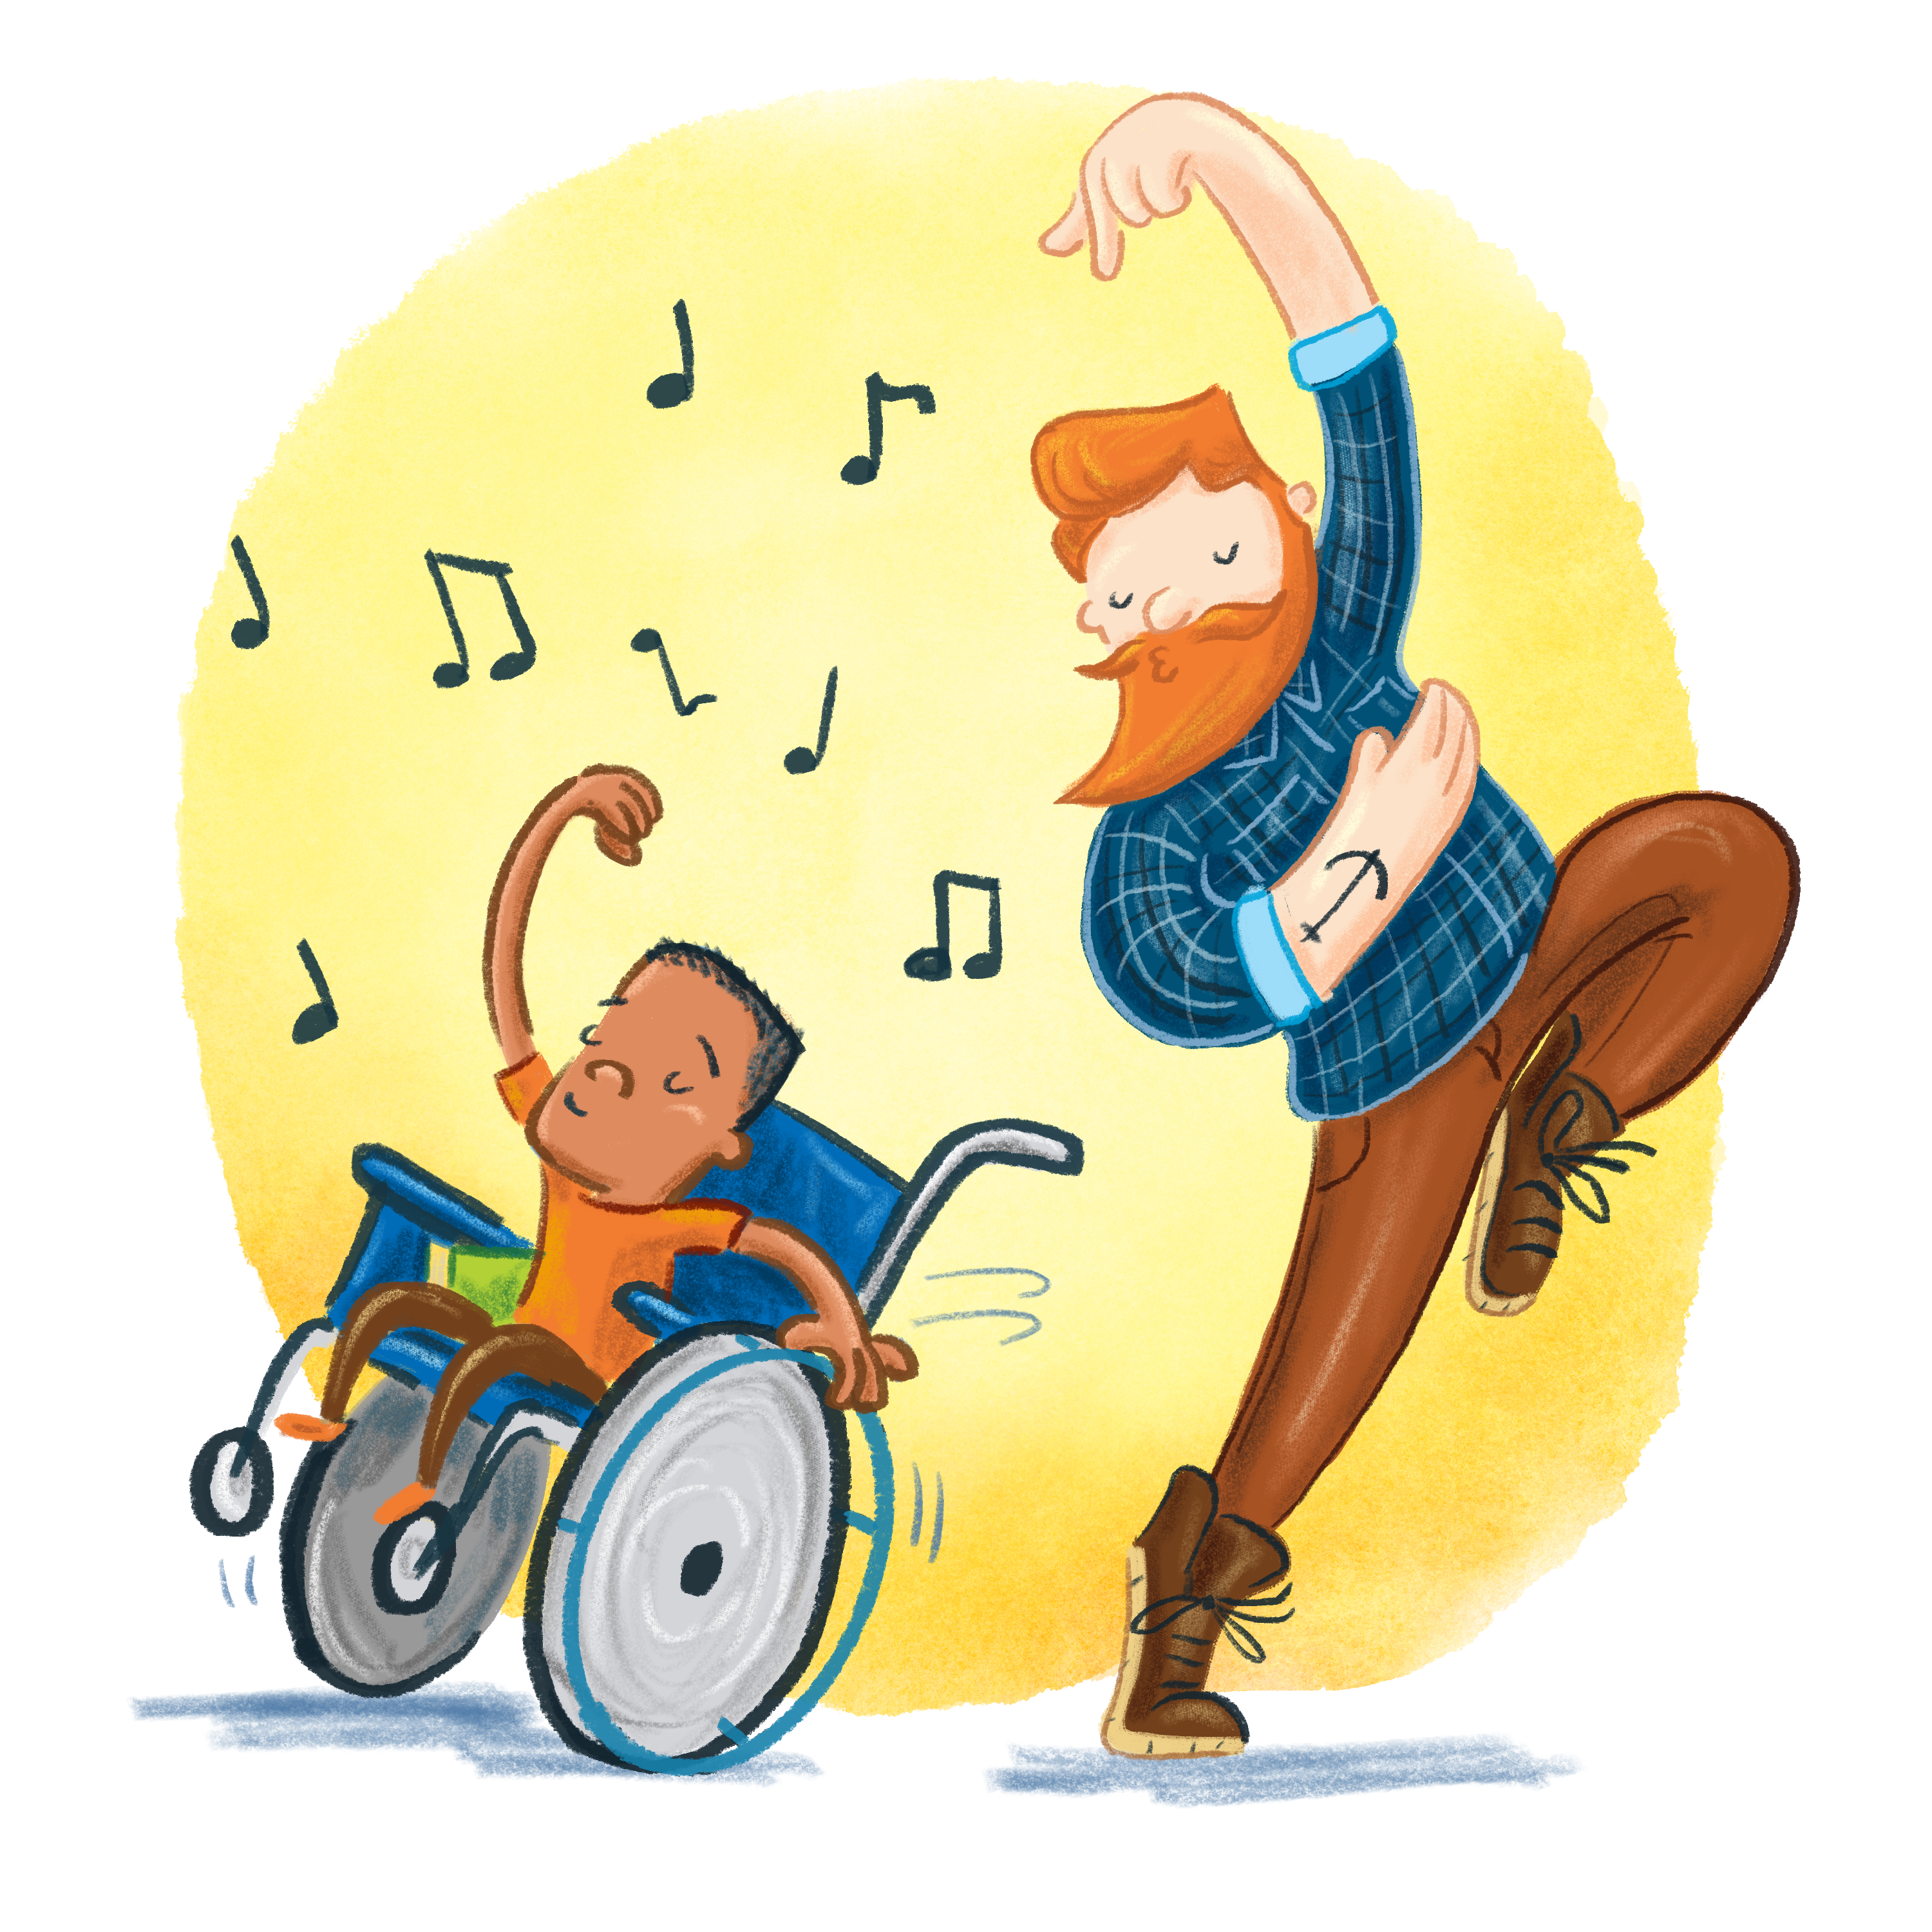 TD summer reading club brand image. Illustration of a man with a ginger beard and a boy with light brown skin in a wheelchair and they are dancing and surrounded by musical notes.